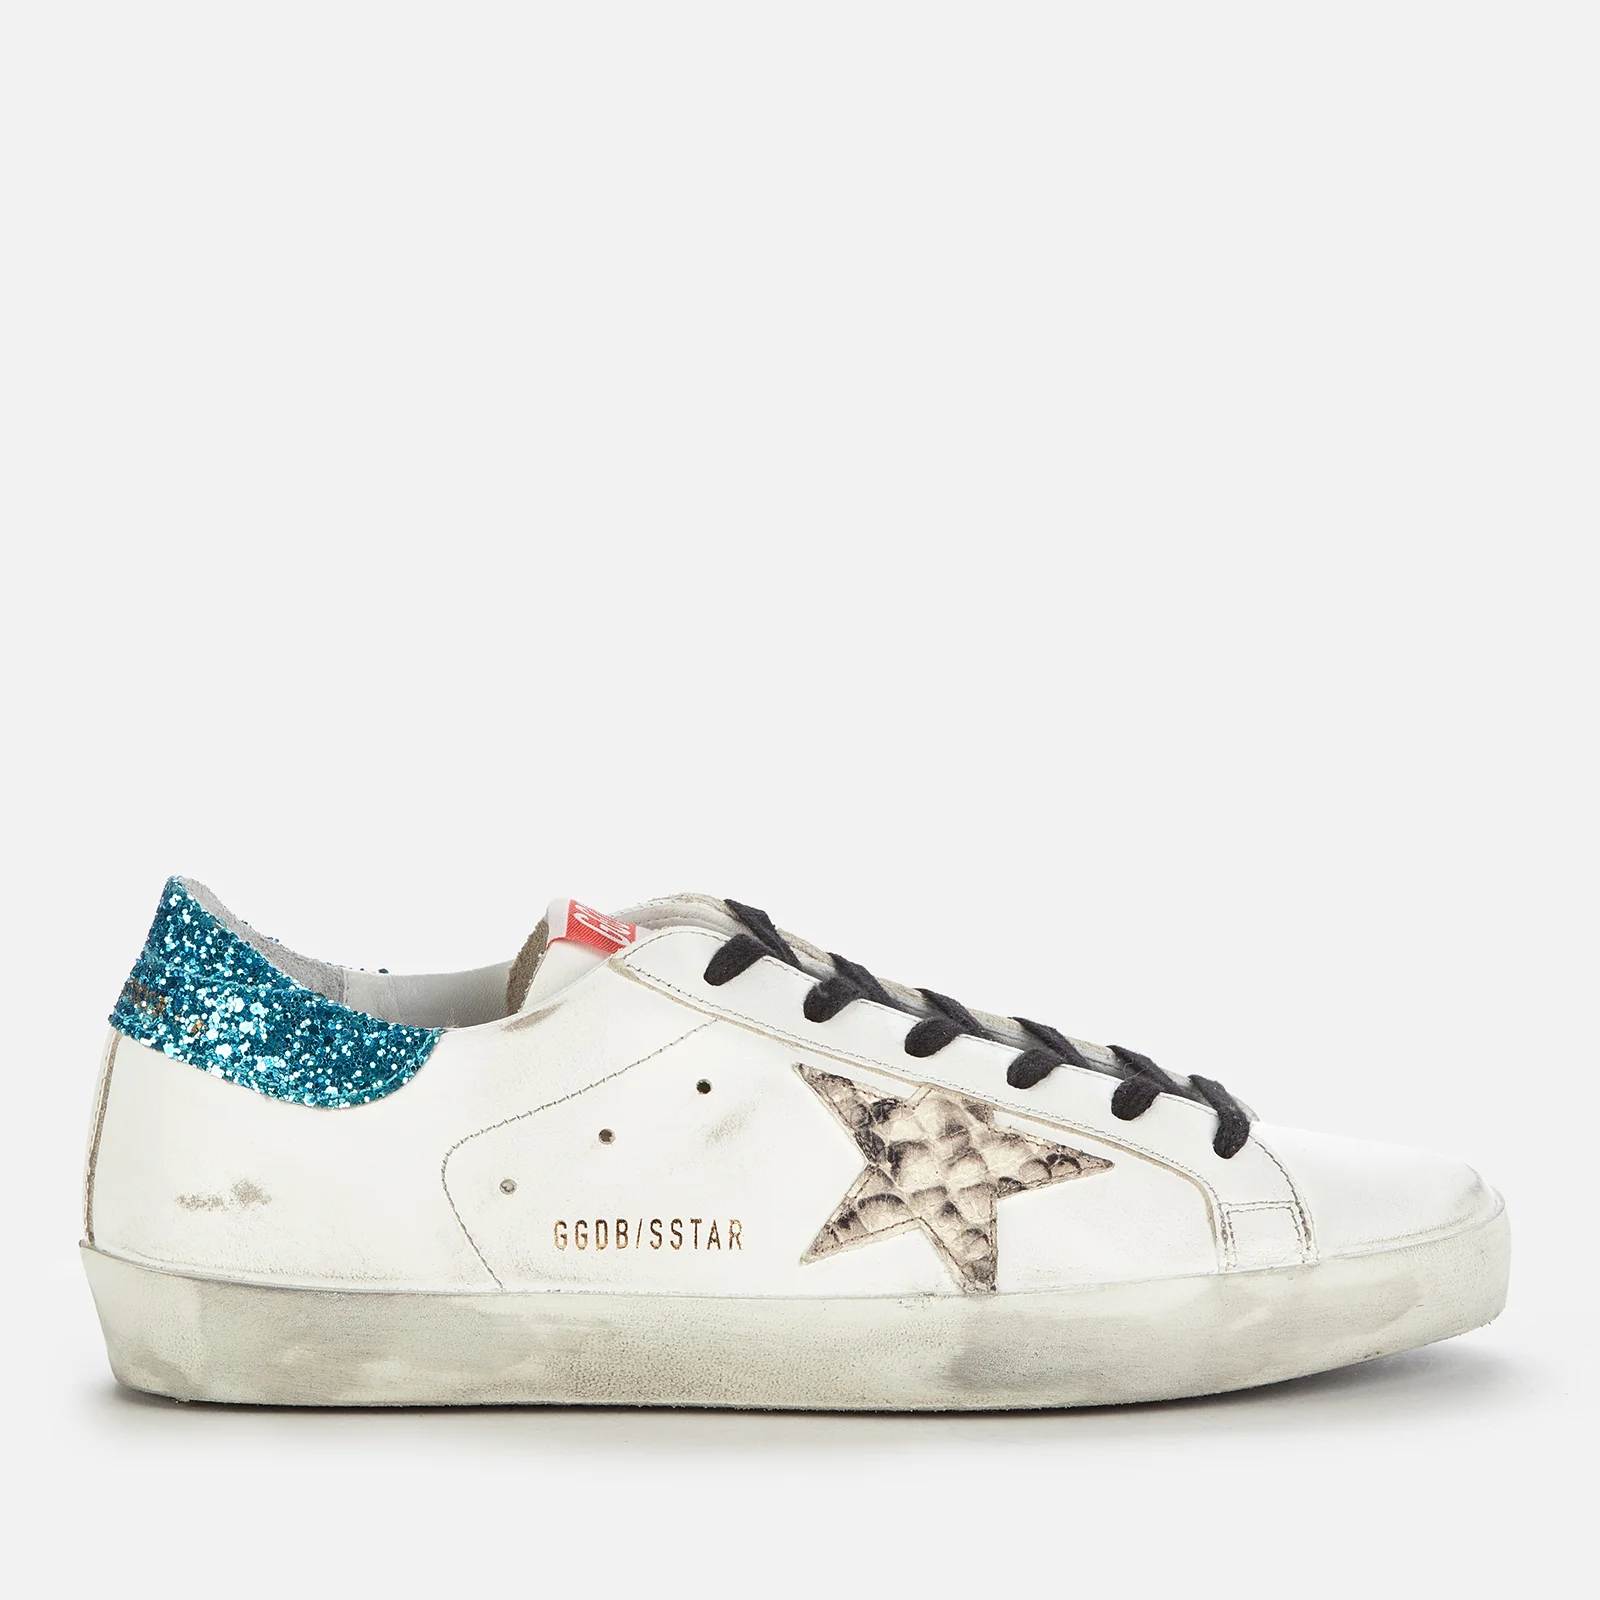 Golden Goose Women's Superstar Leather Trainers - White/Silver/Light Blue Image 1